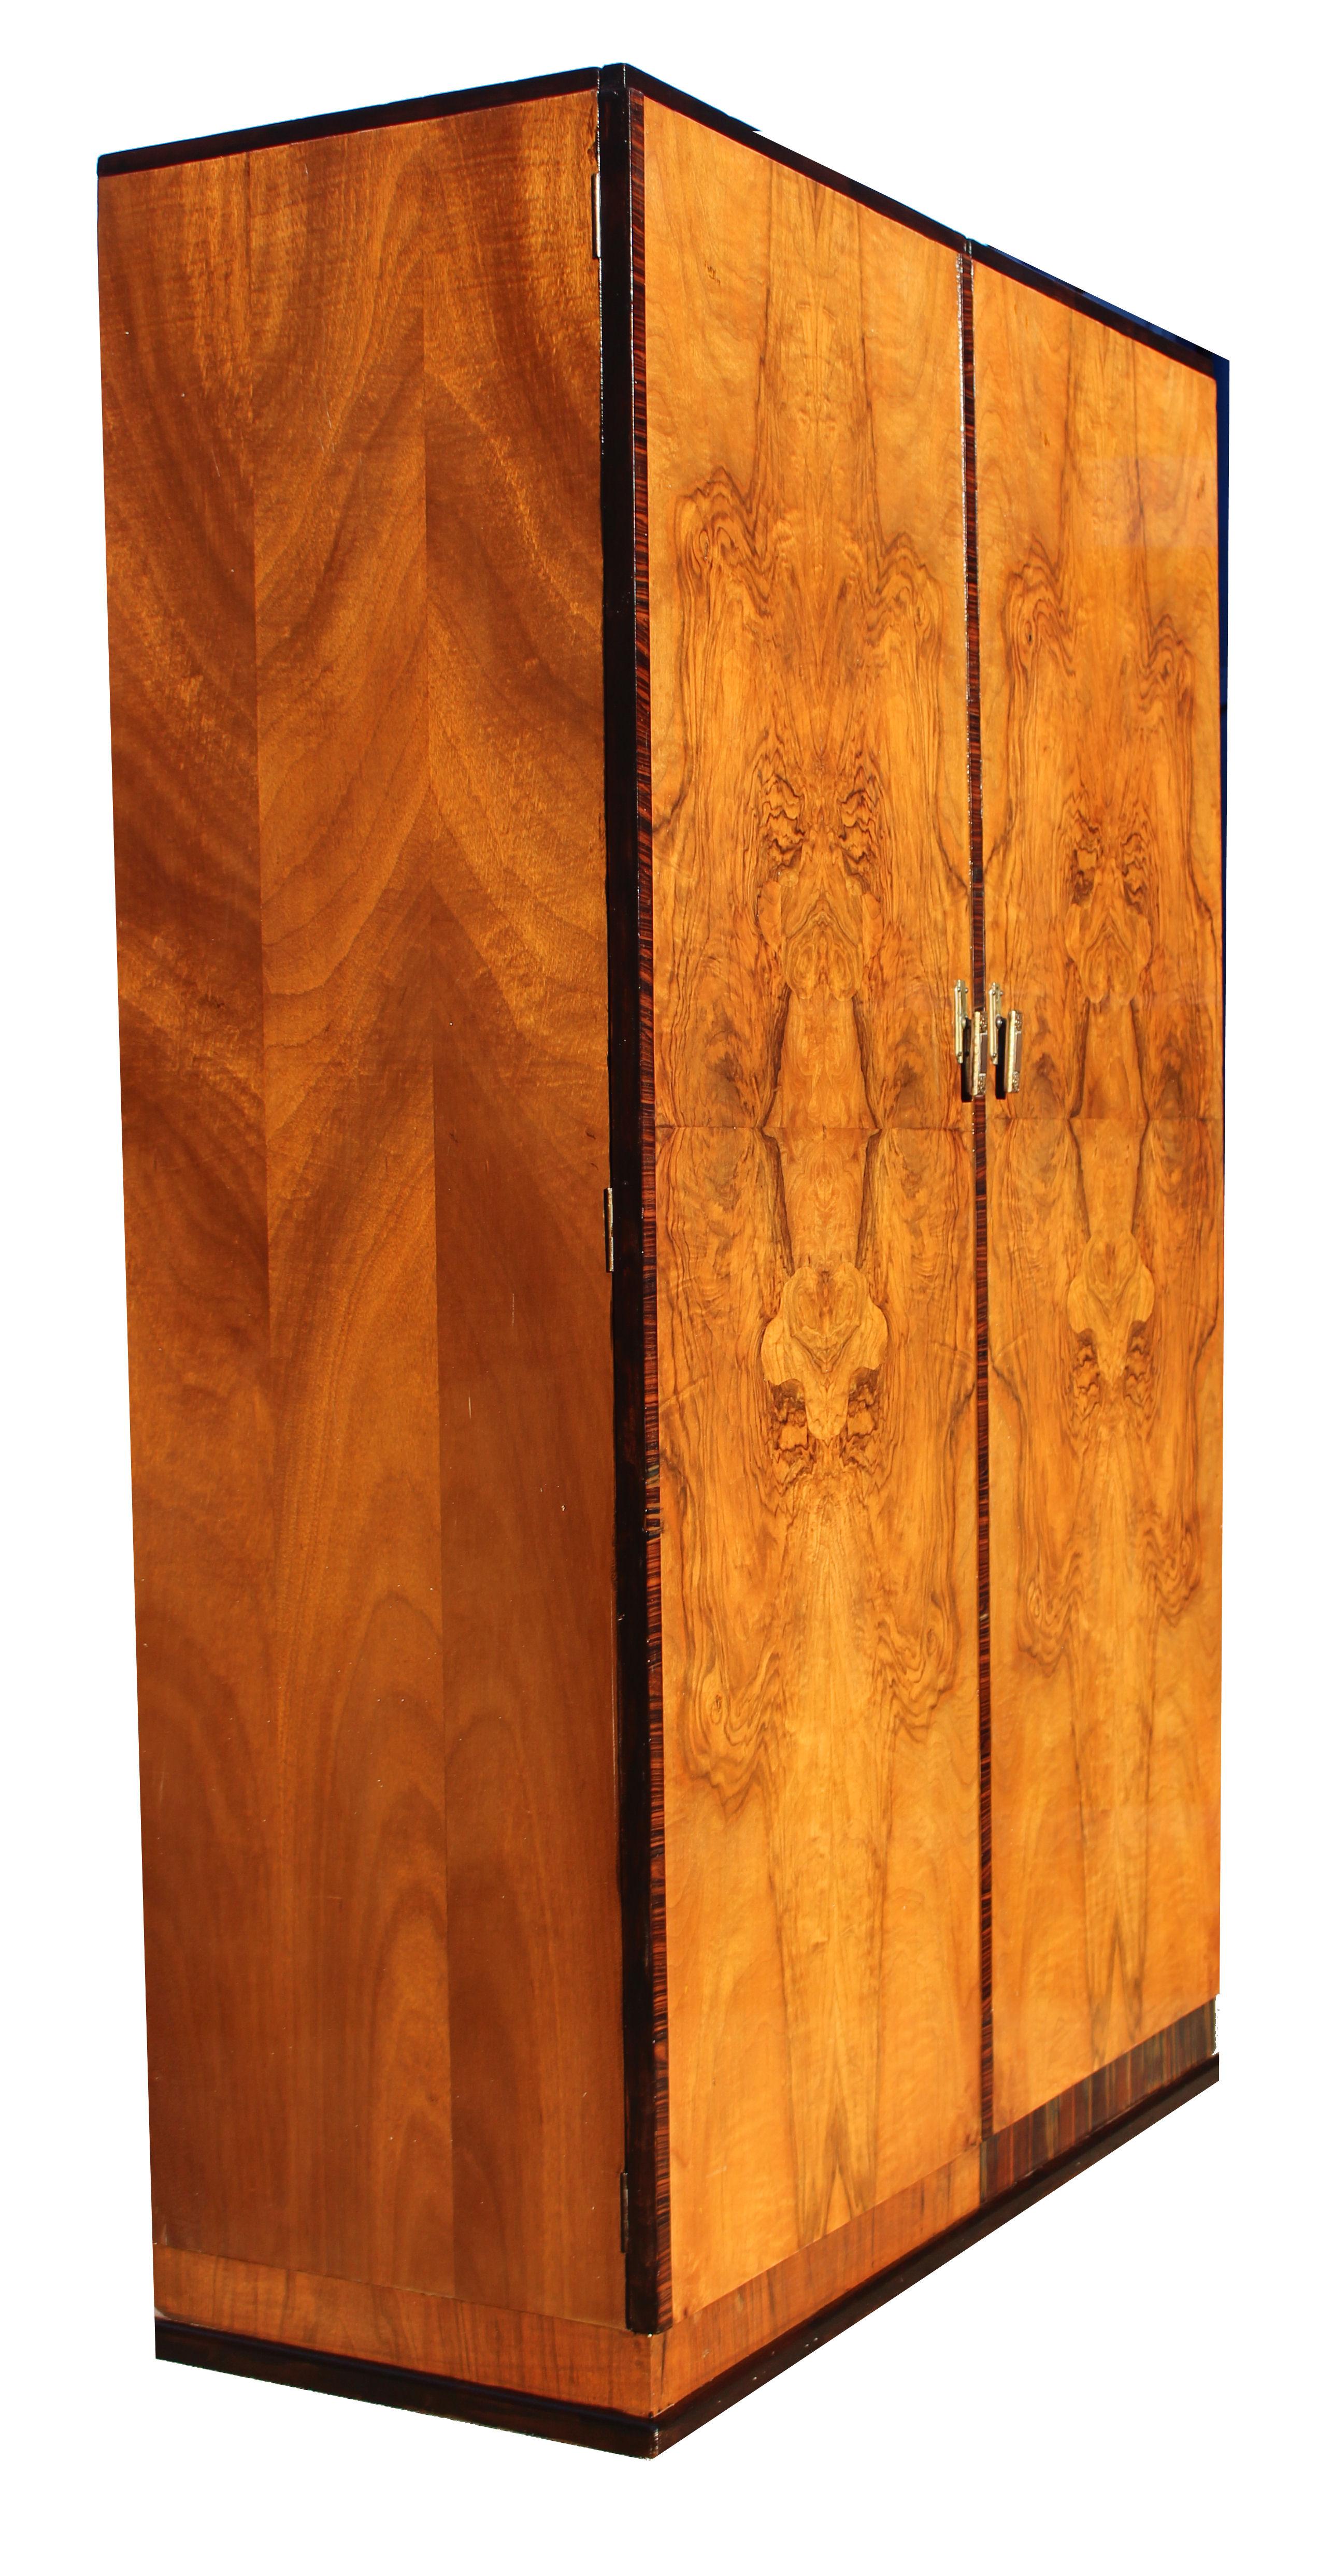 For your consideration is this very striking and imposing Art Deco double wardrobe with a modernist slant. The veneers are wonderful offering light and dark tones. Book paged walnut veneered doors with Macassar banding to the edges and plinth. This